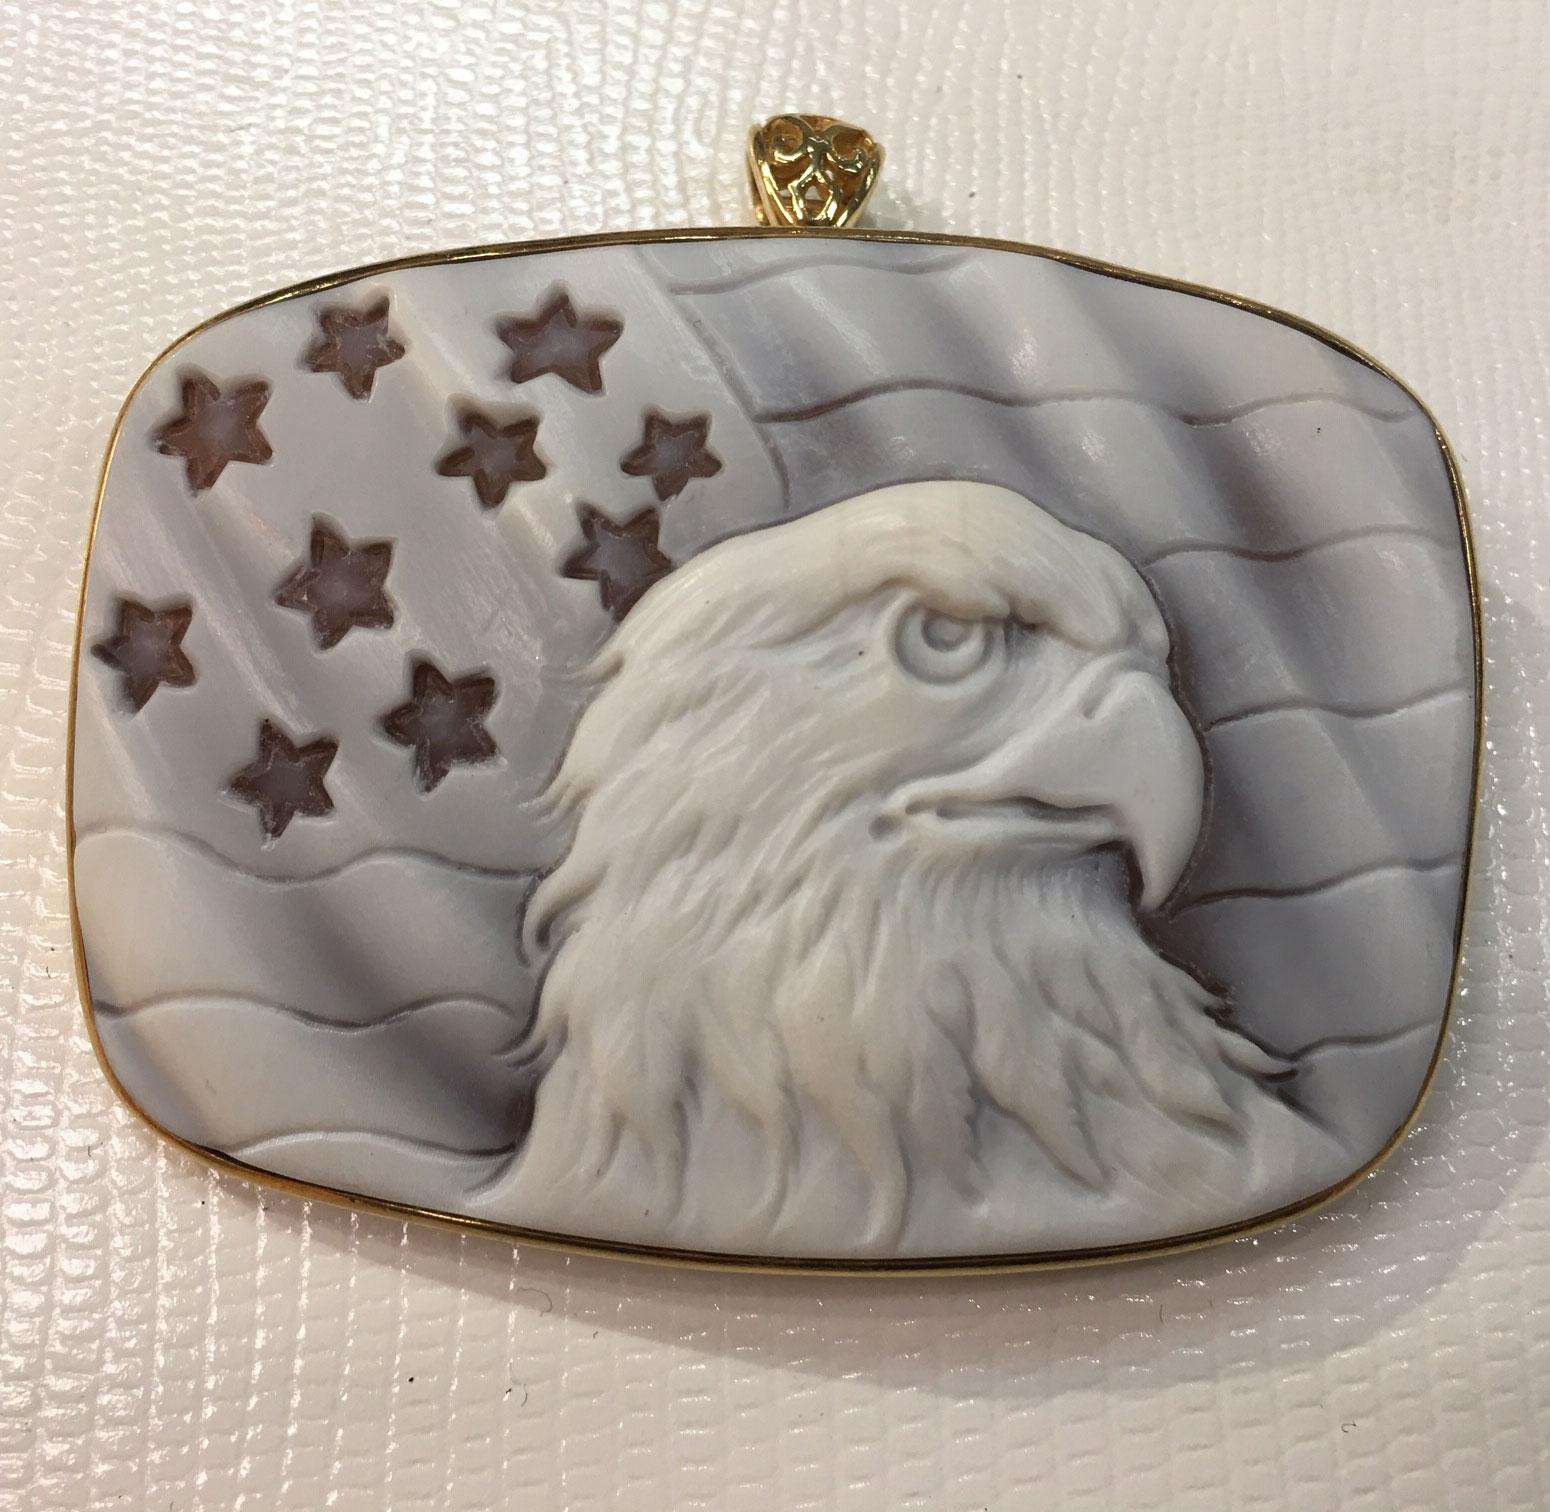 Majestic American Eagle on a backdrop of The Stars and Stripes; Finely hand crafted and signed Cameo set in gilded Sterling Silver mounting; So Striking and versatile, can be worn as a pendant or a brooch! Measuring approx. 2.5 inches x 1.25 inches.